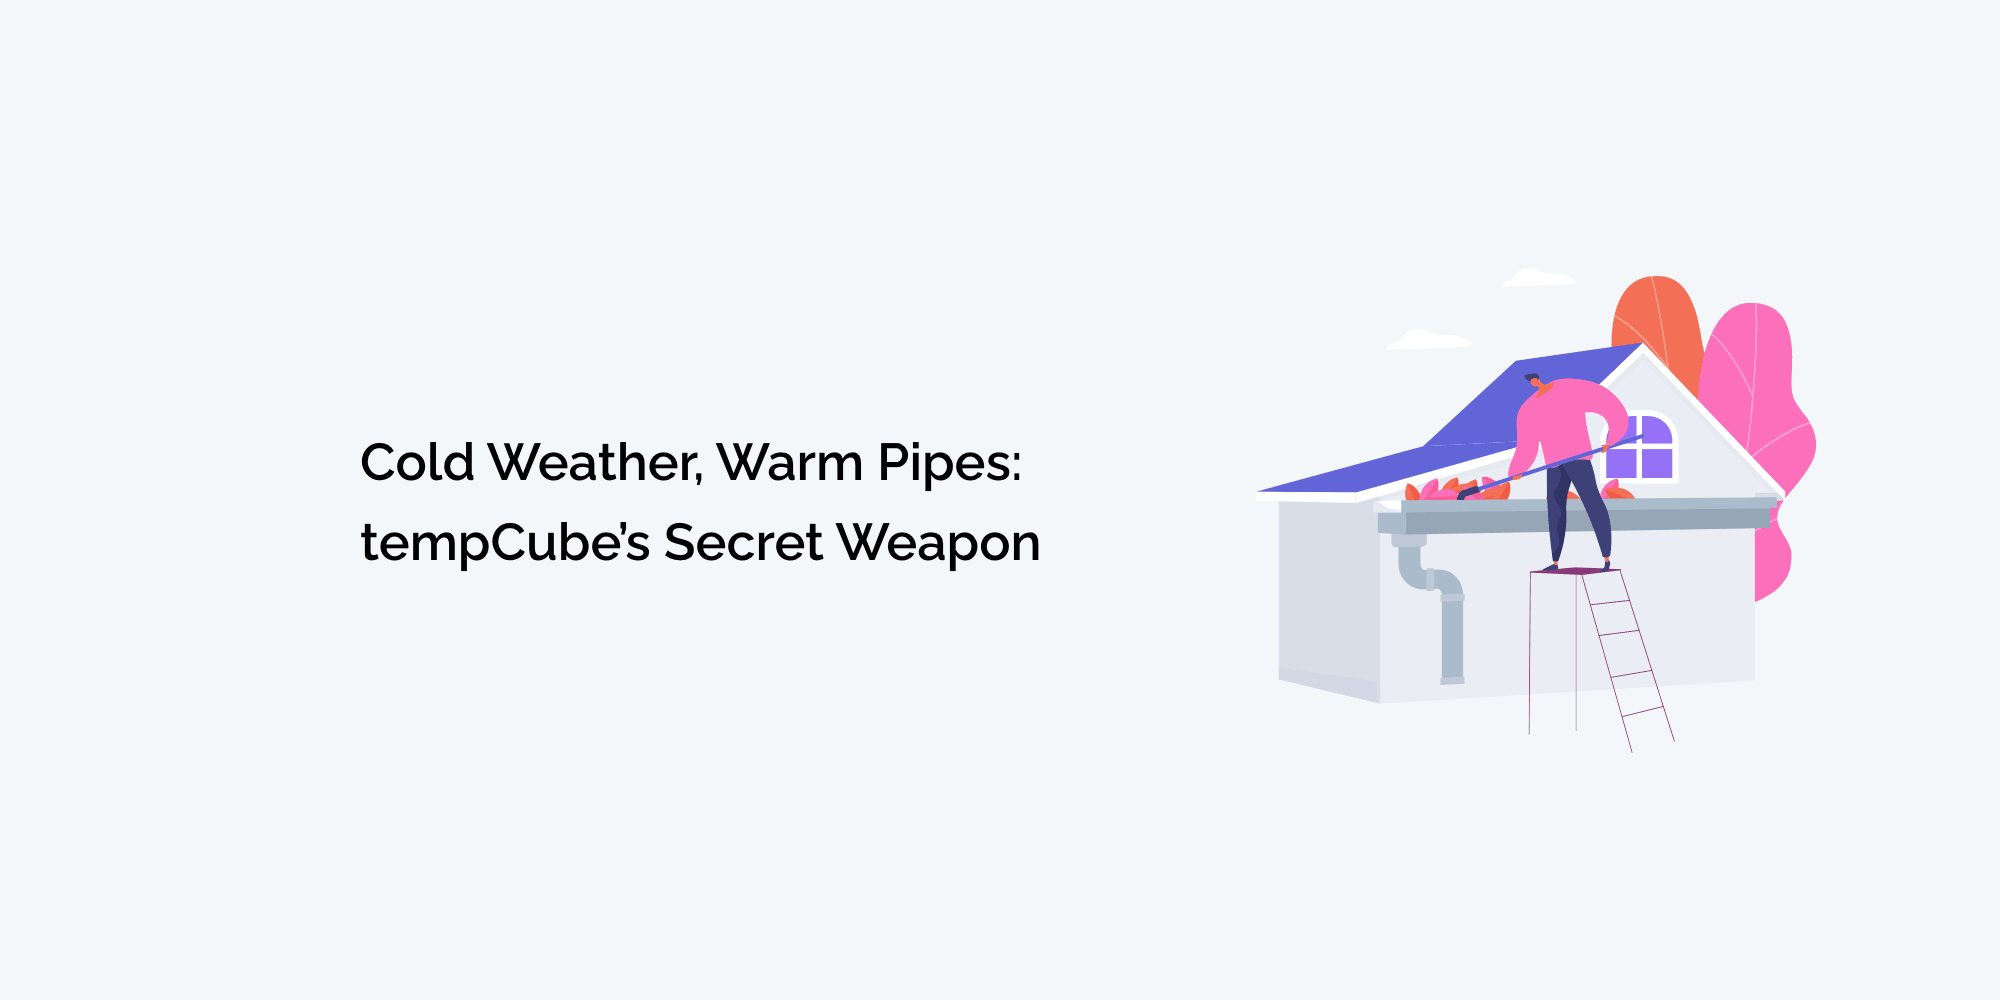 Cold Weather, Warm Pipes: tempCube's Secret Weapon